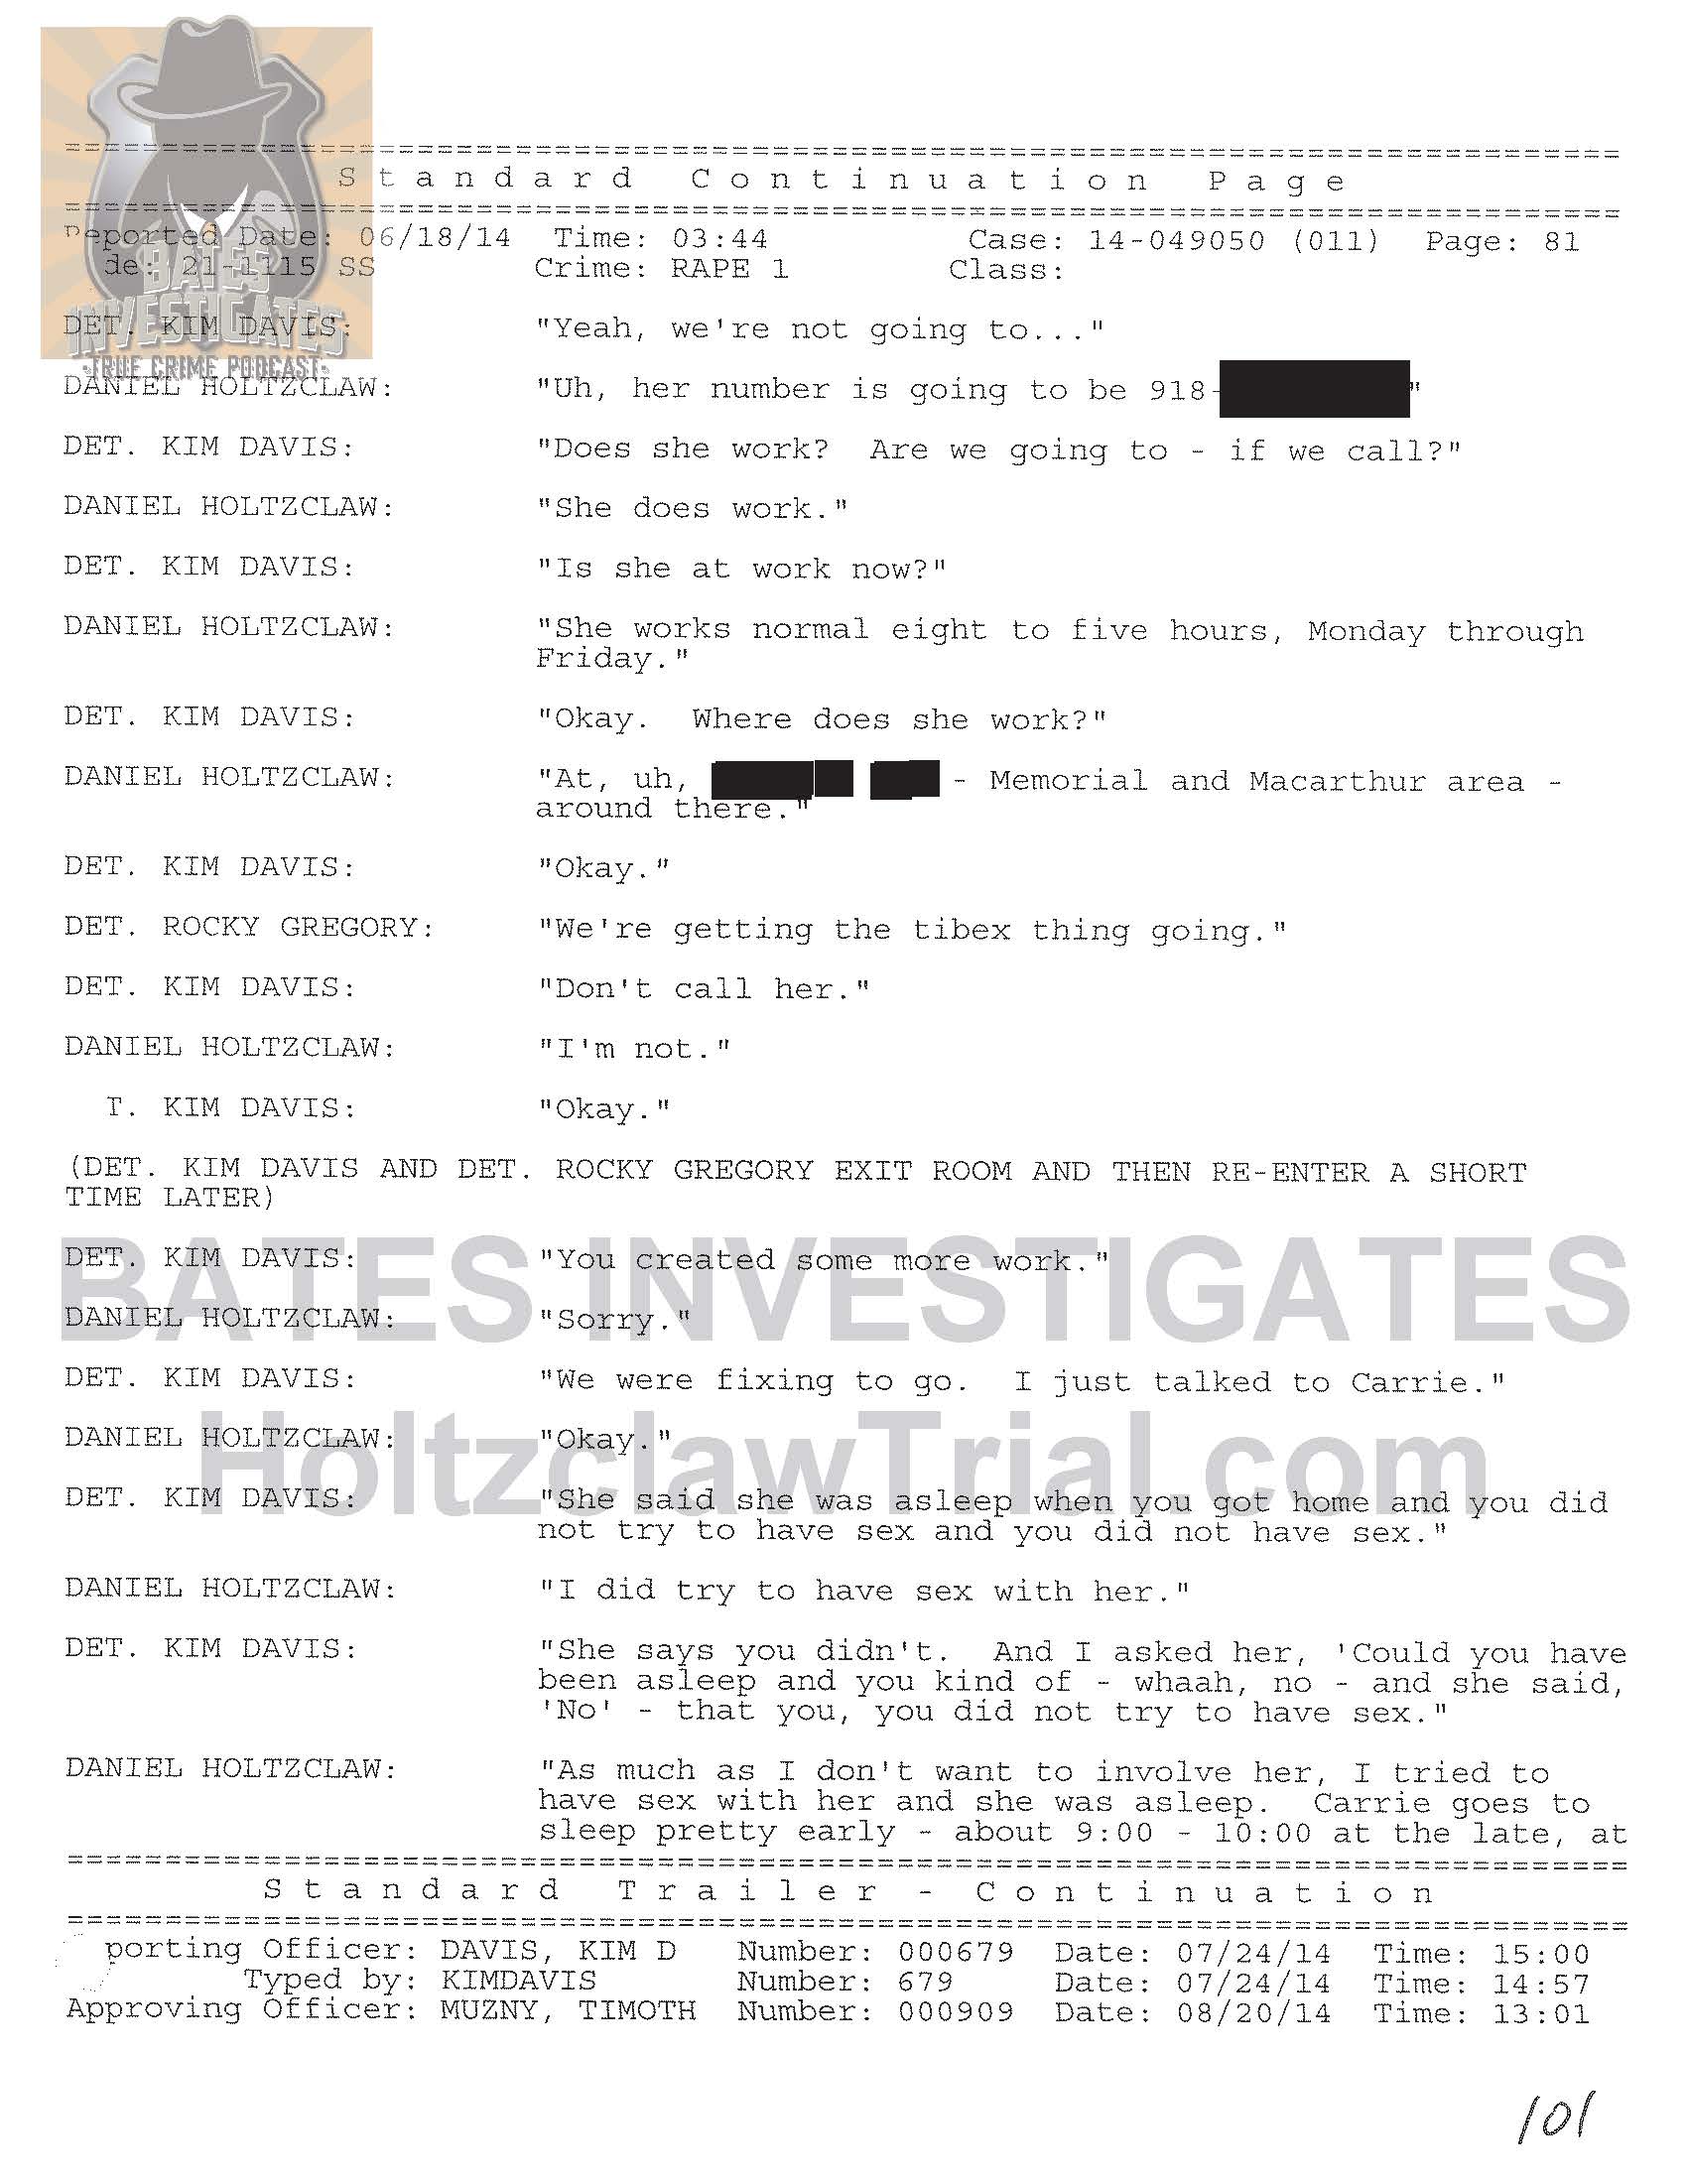 Holtzclaw Interrogation Transcript - Ep02 Redacted_Page_81.jpg